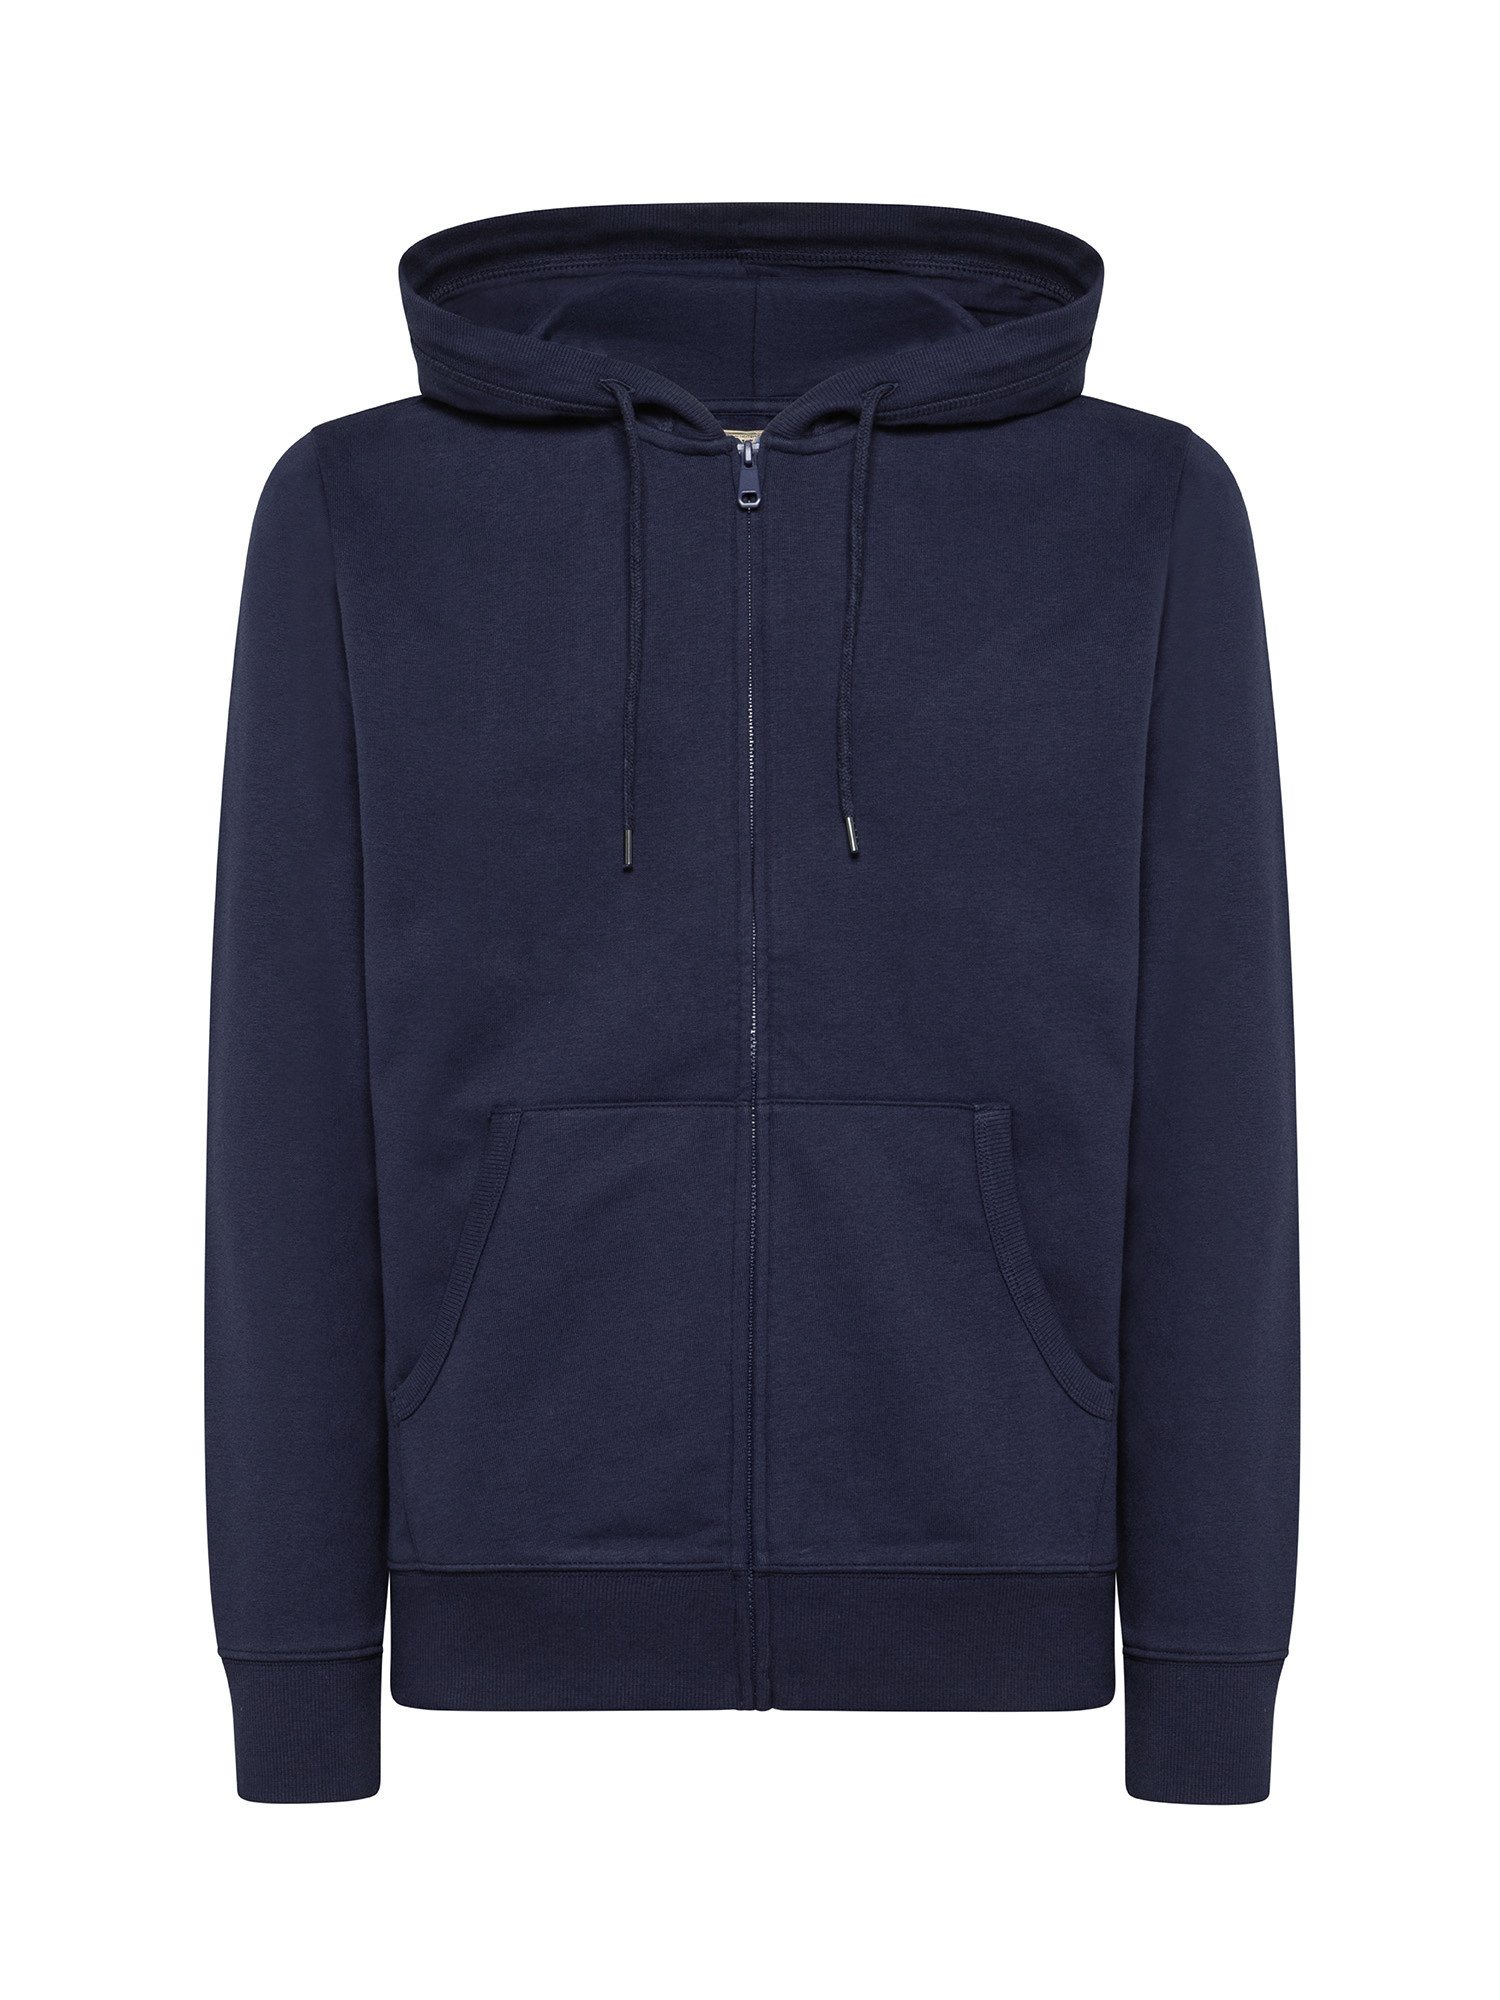 JCT - Felpa con cappuccio full zip soft touch, Blu, large image number 0